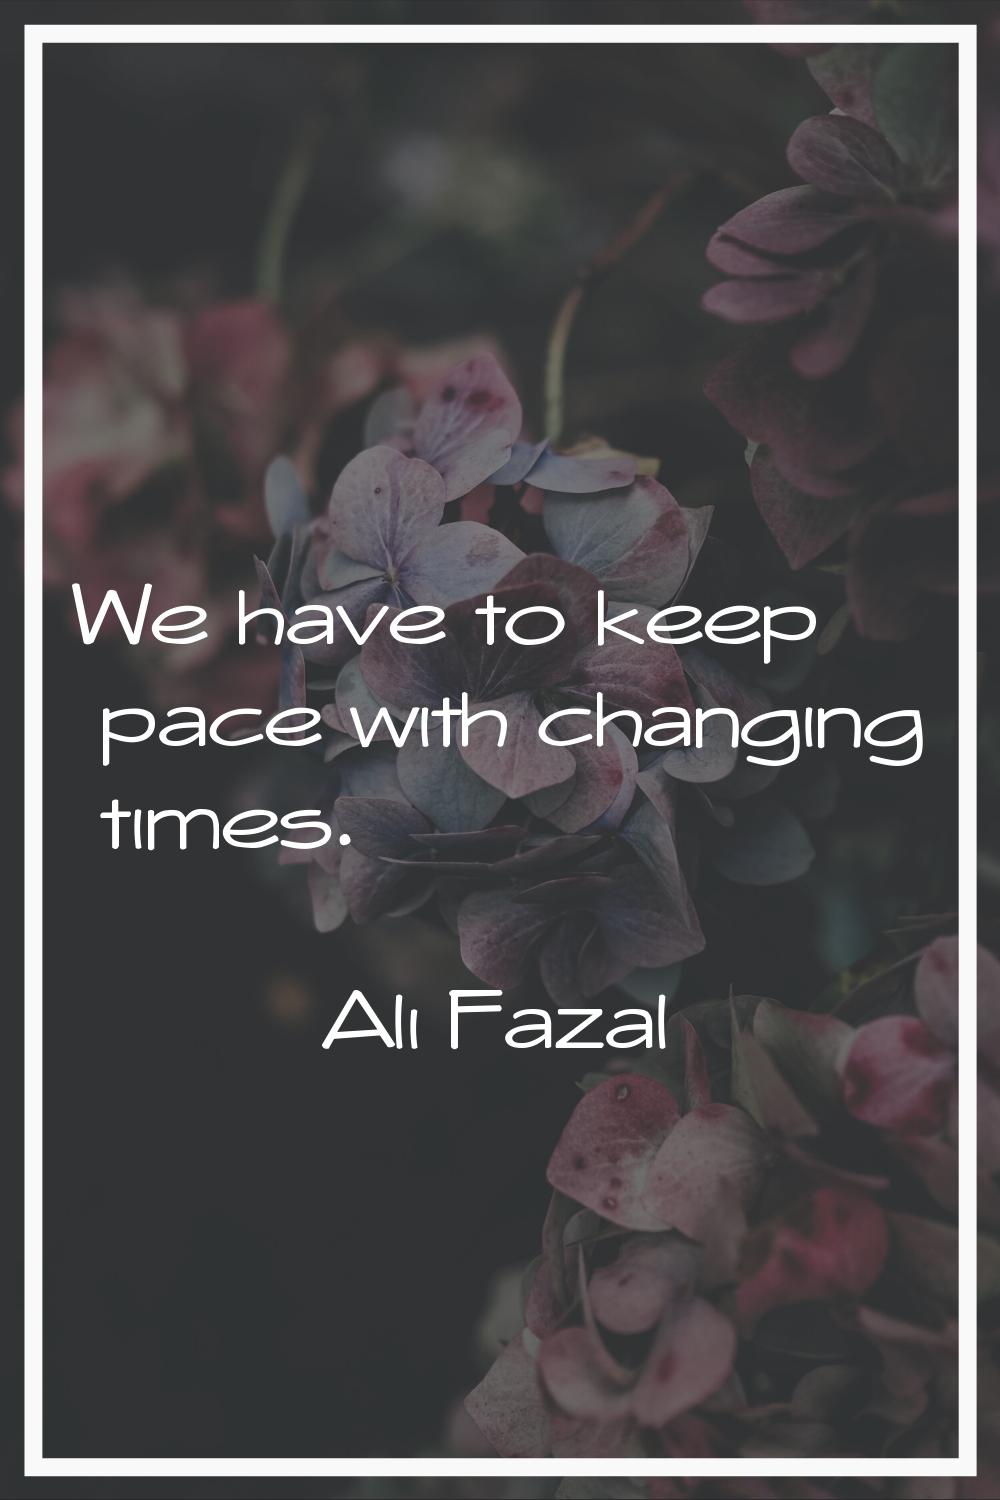 We have to keep pace with changing times.